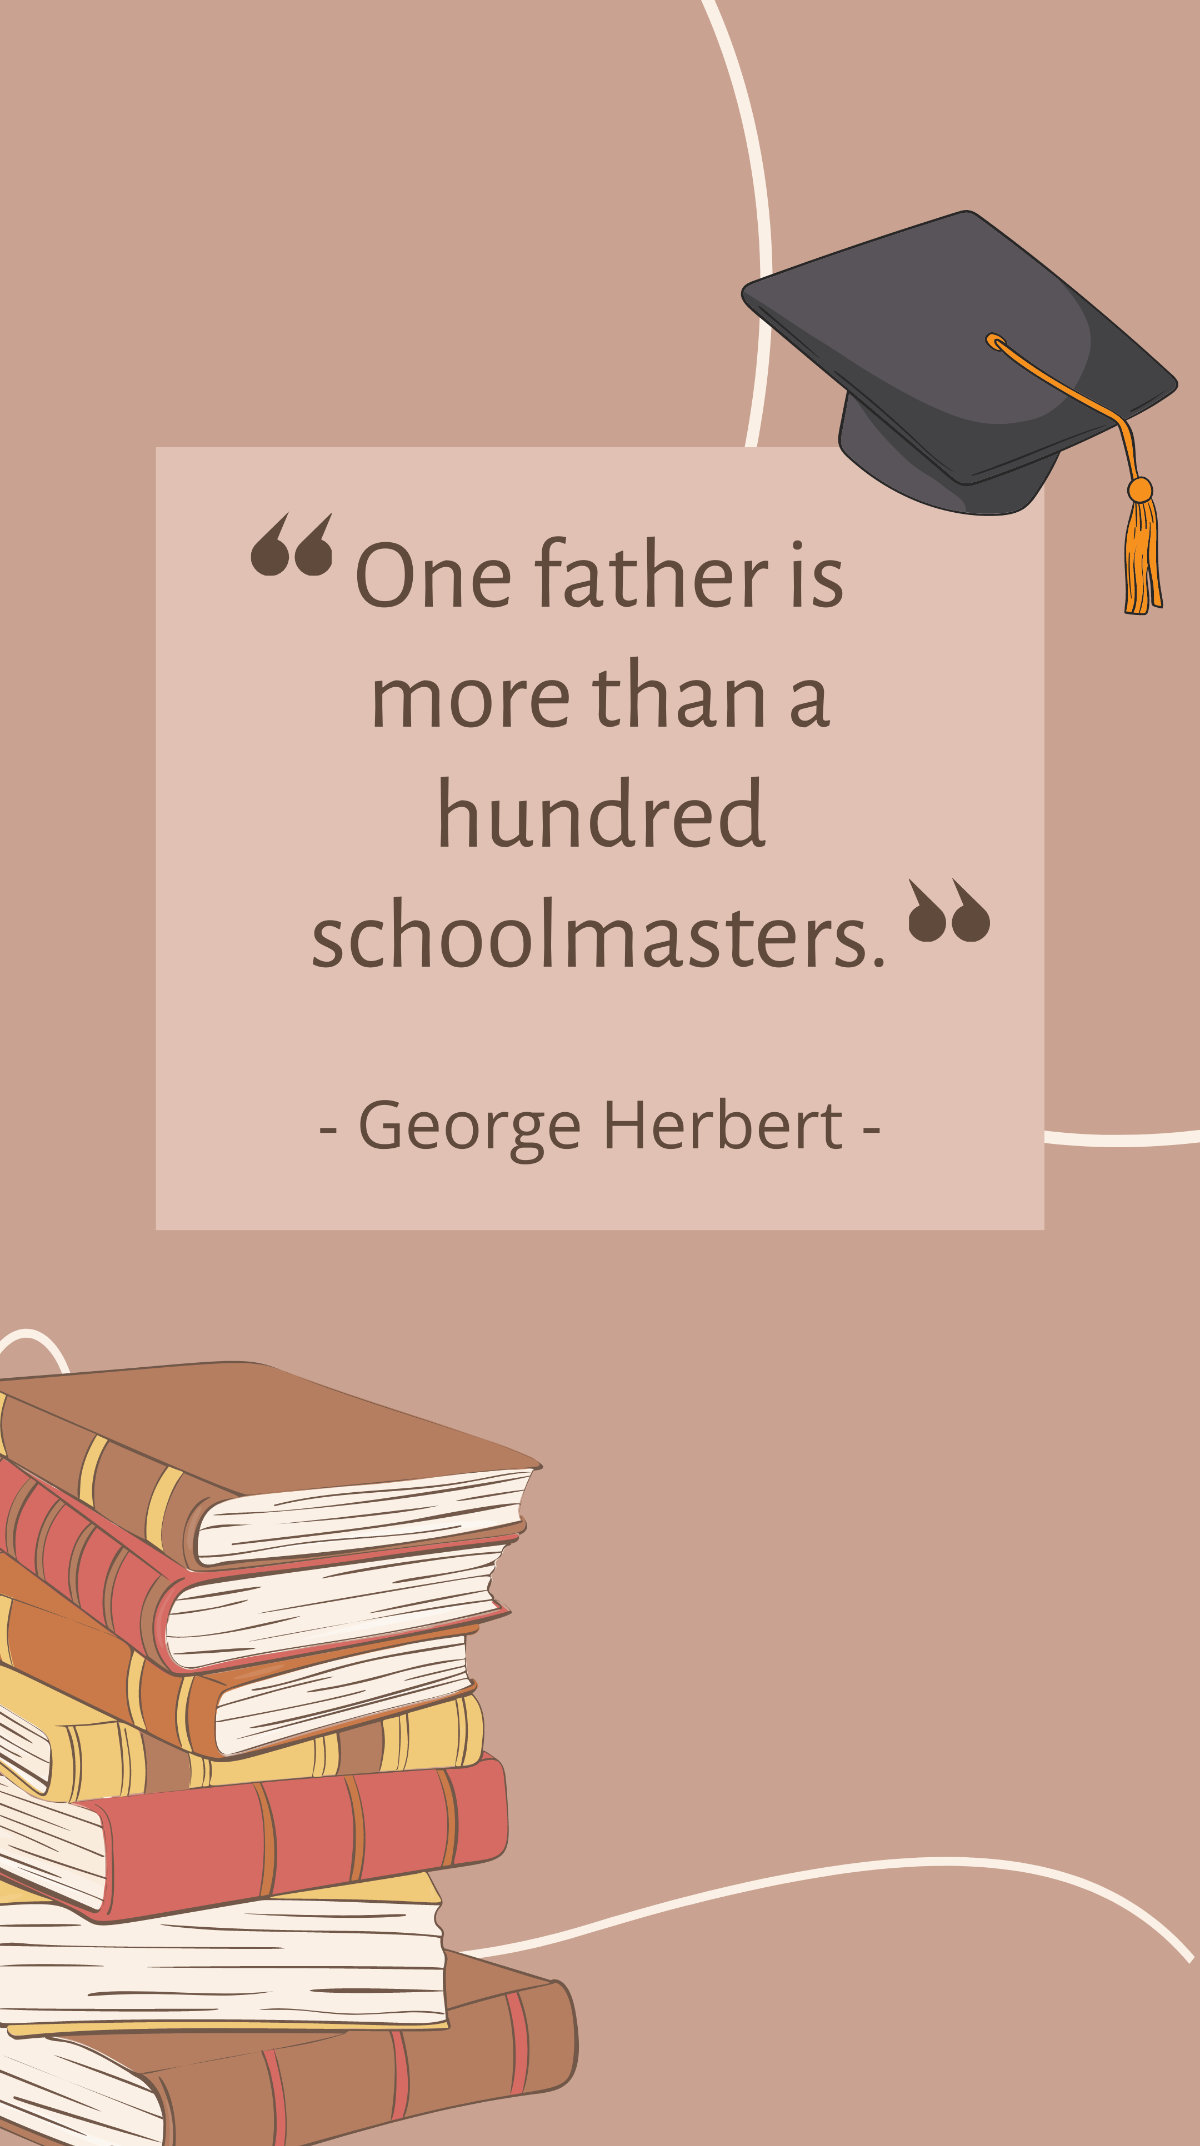 George Herbert - “One father is more than a hundred schoolmasters.” Template